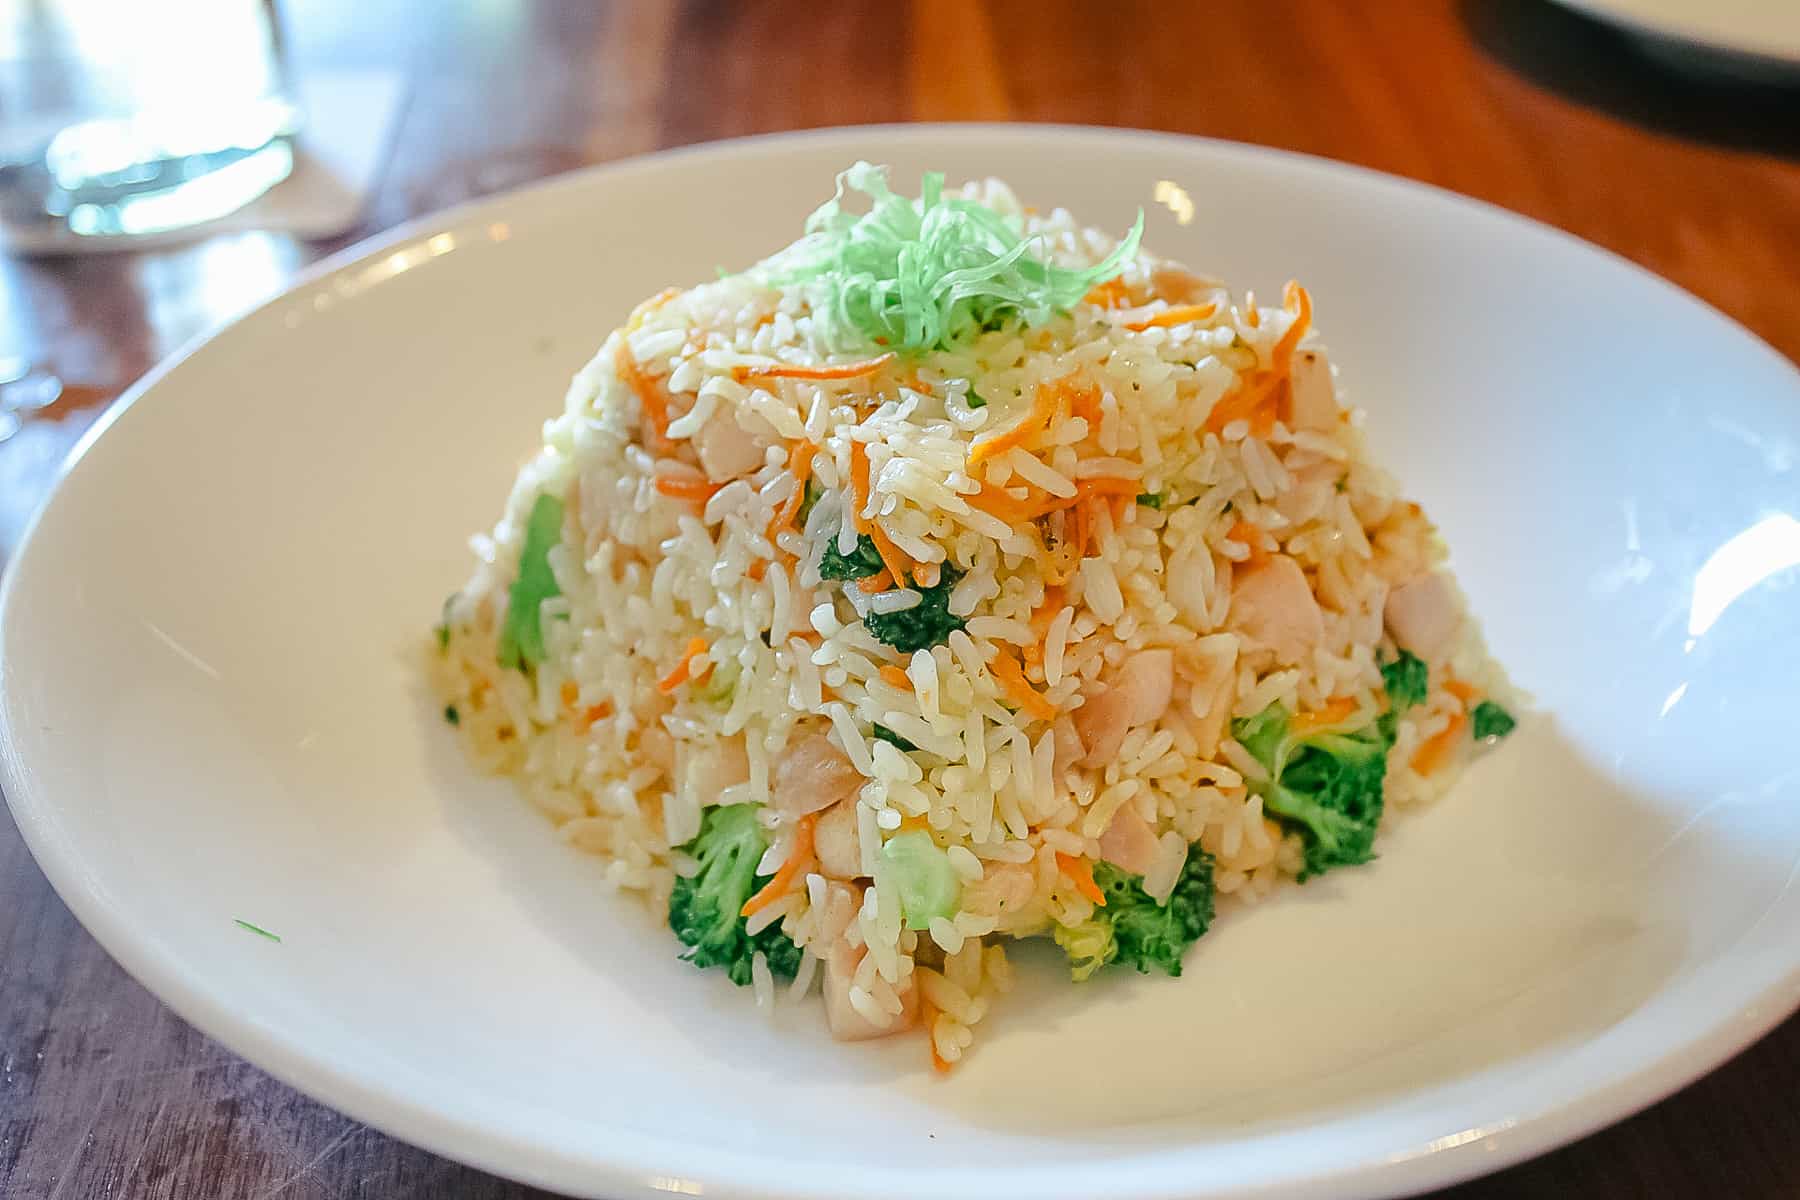 Fried rice prepared with chicken.